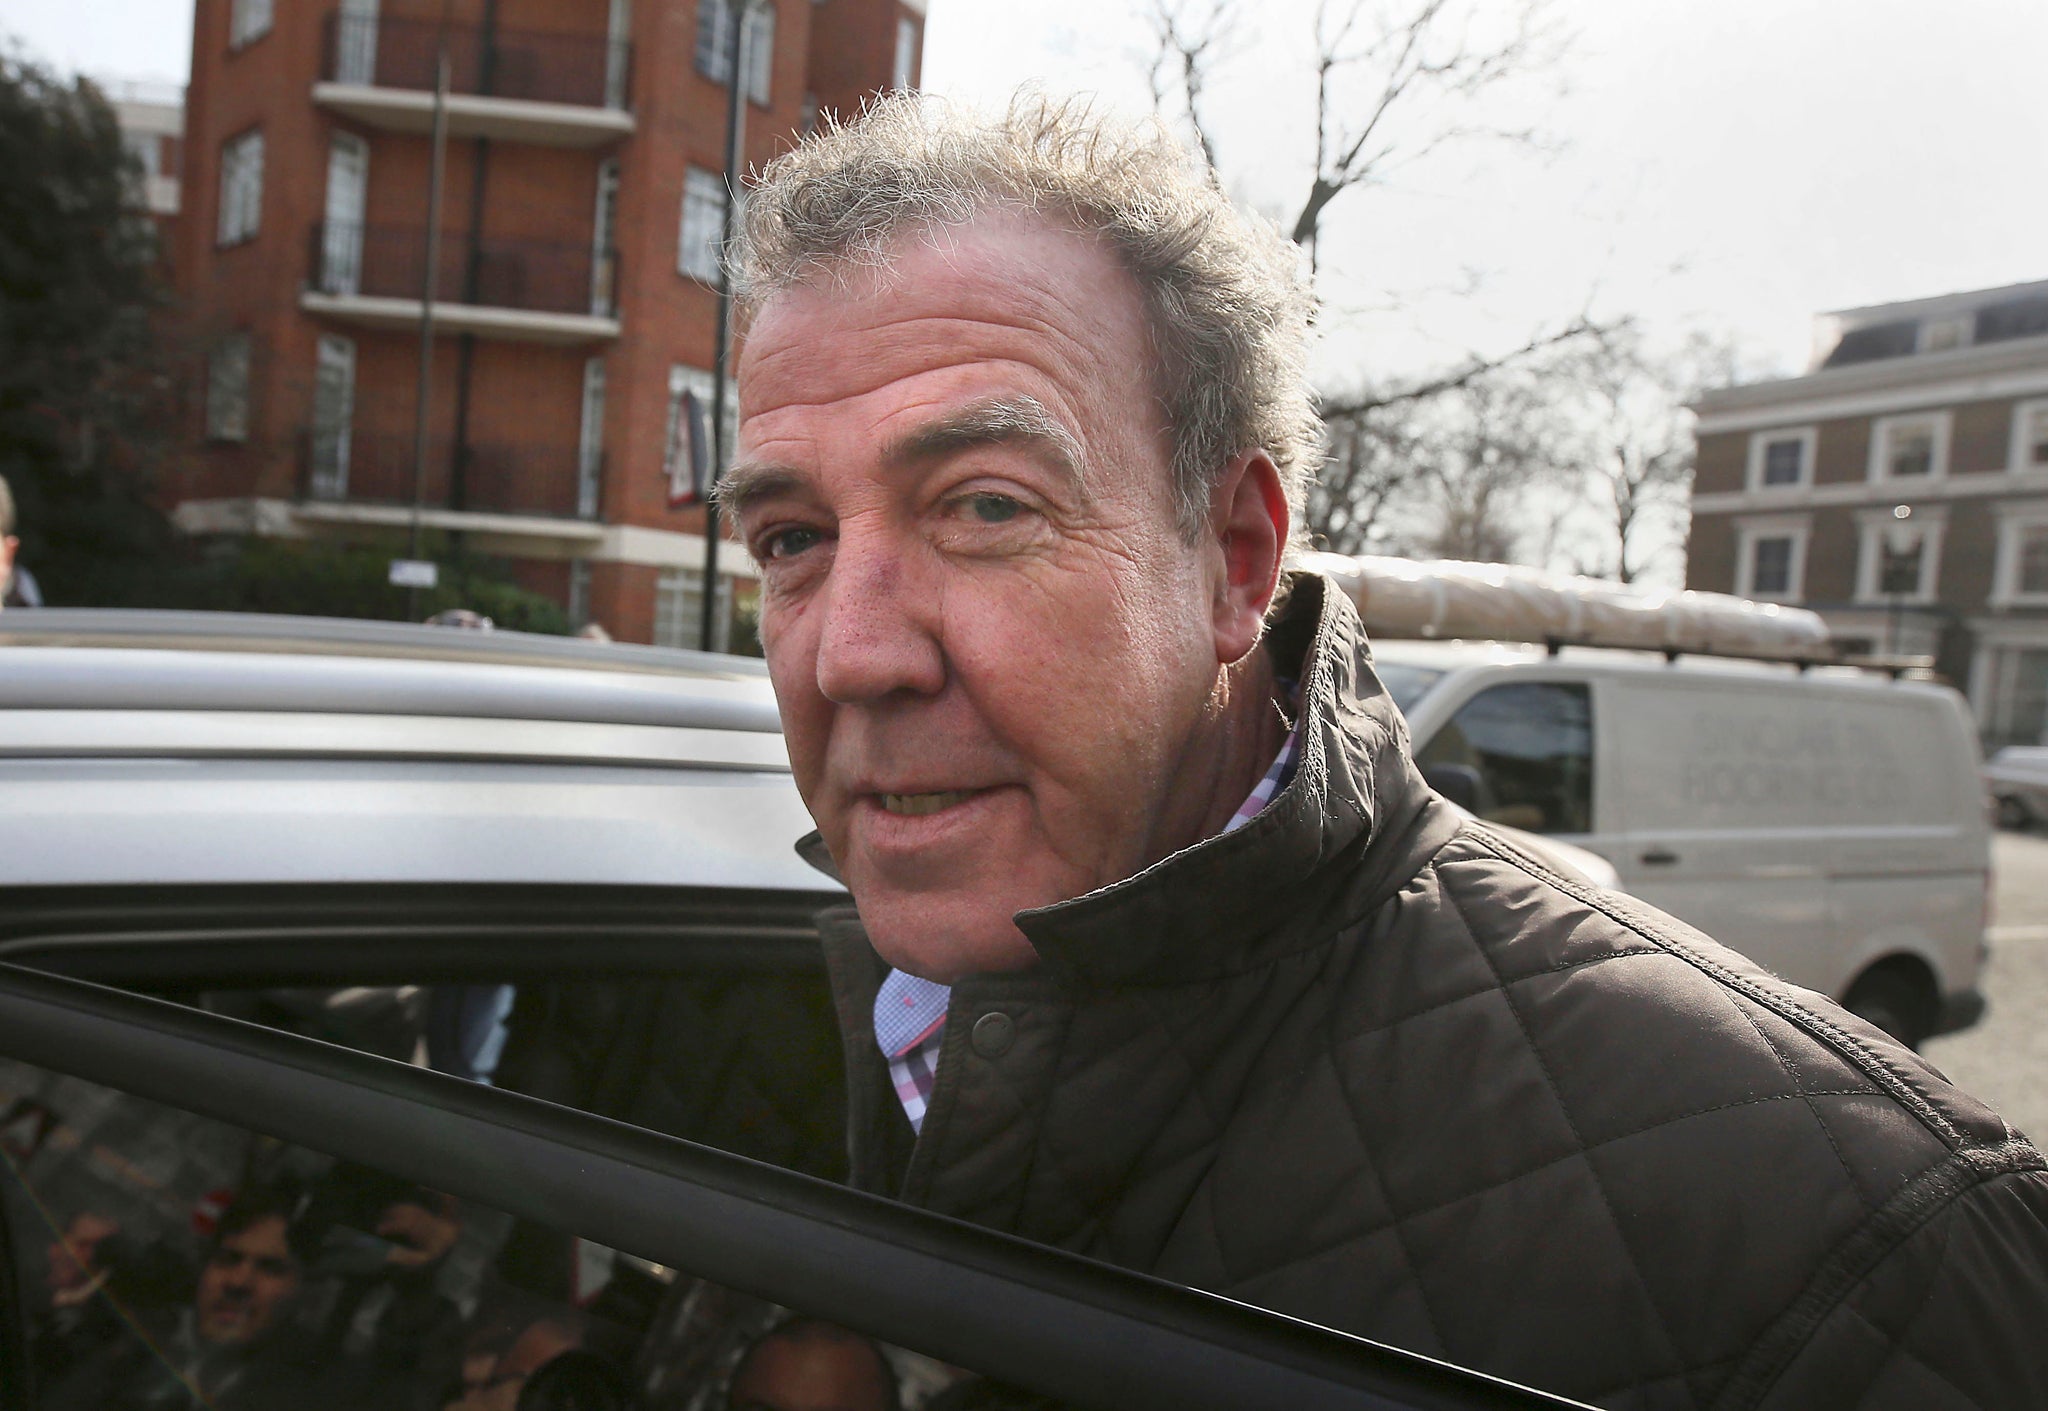 Jeremy Clarkson makes an appearance in Amazon Prime's new advert